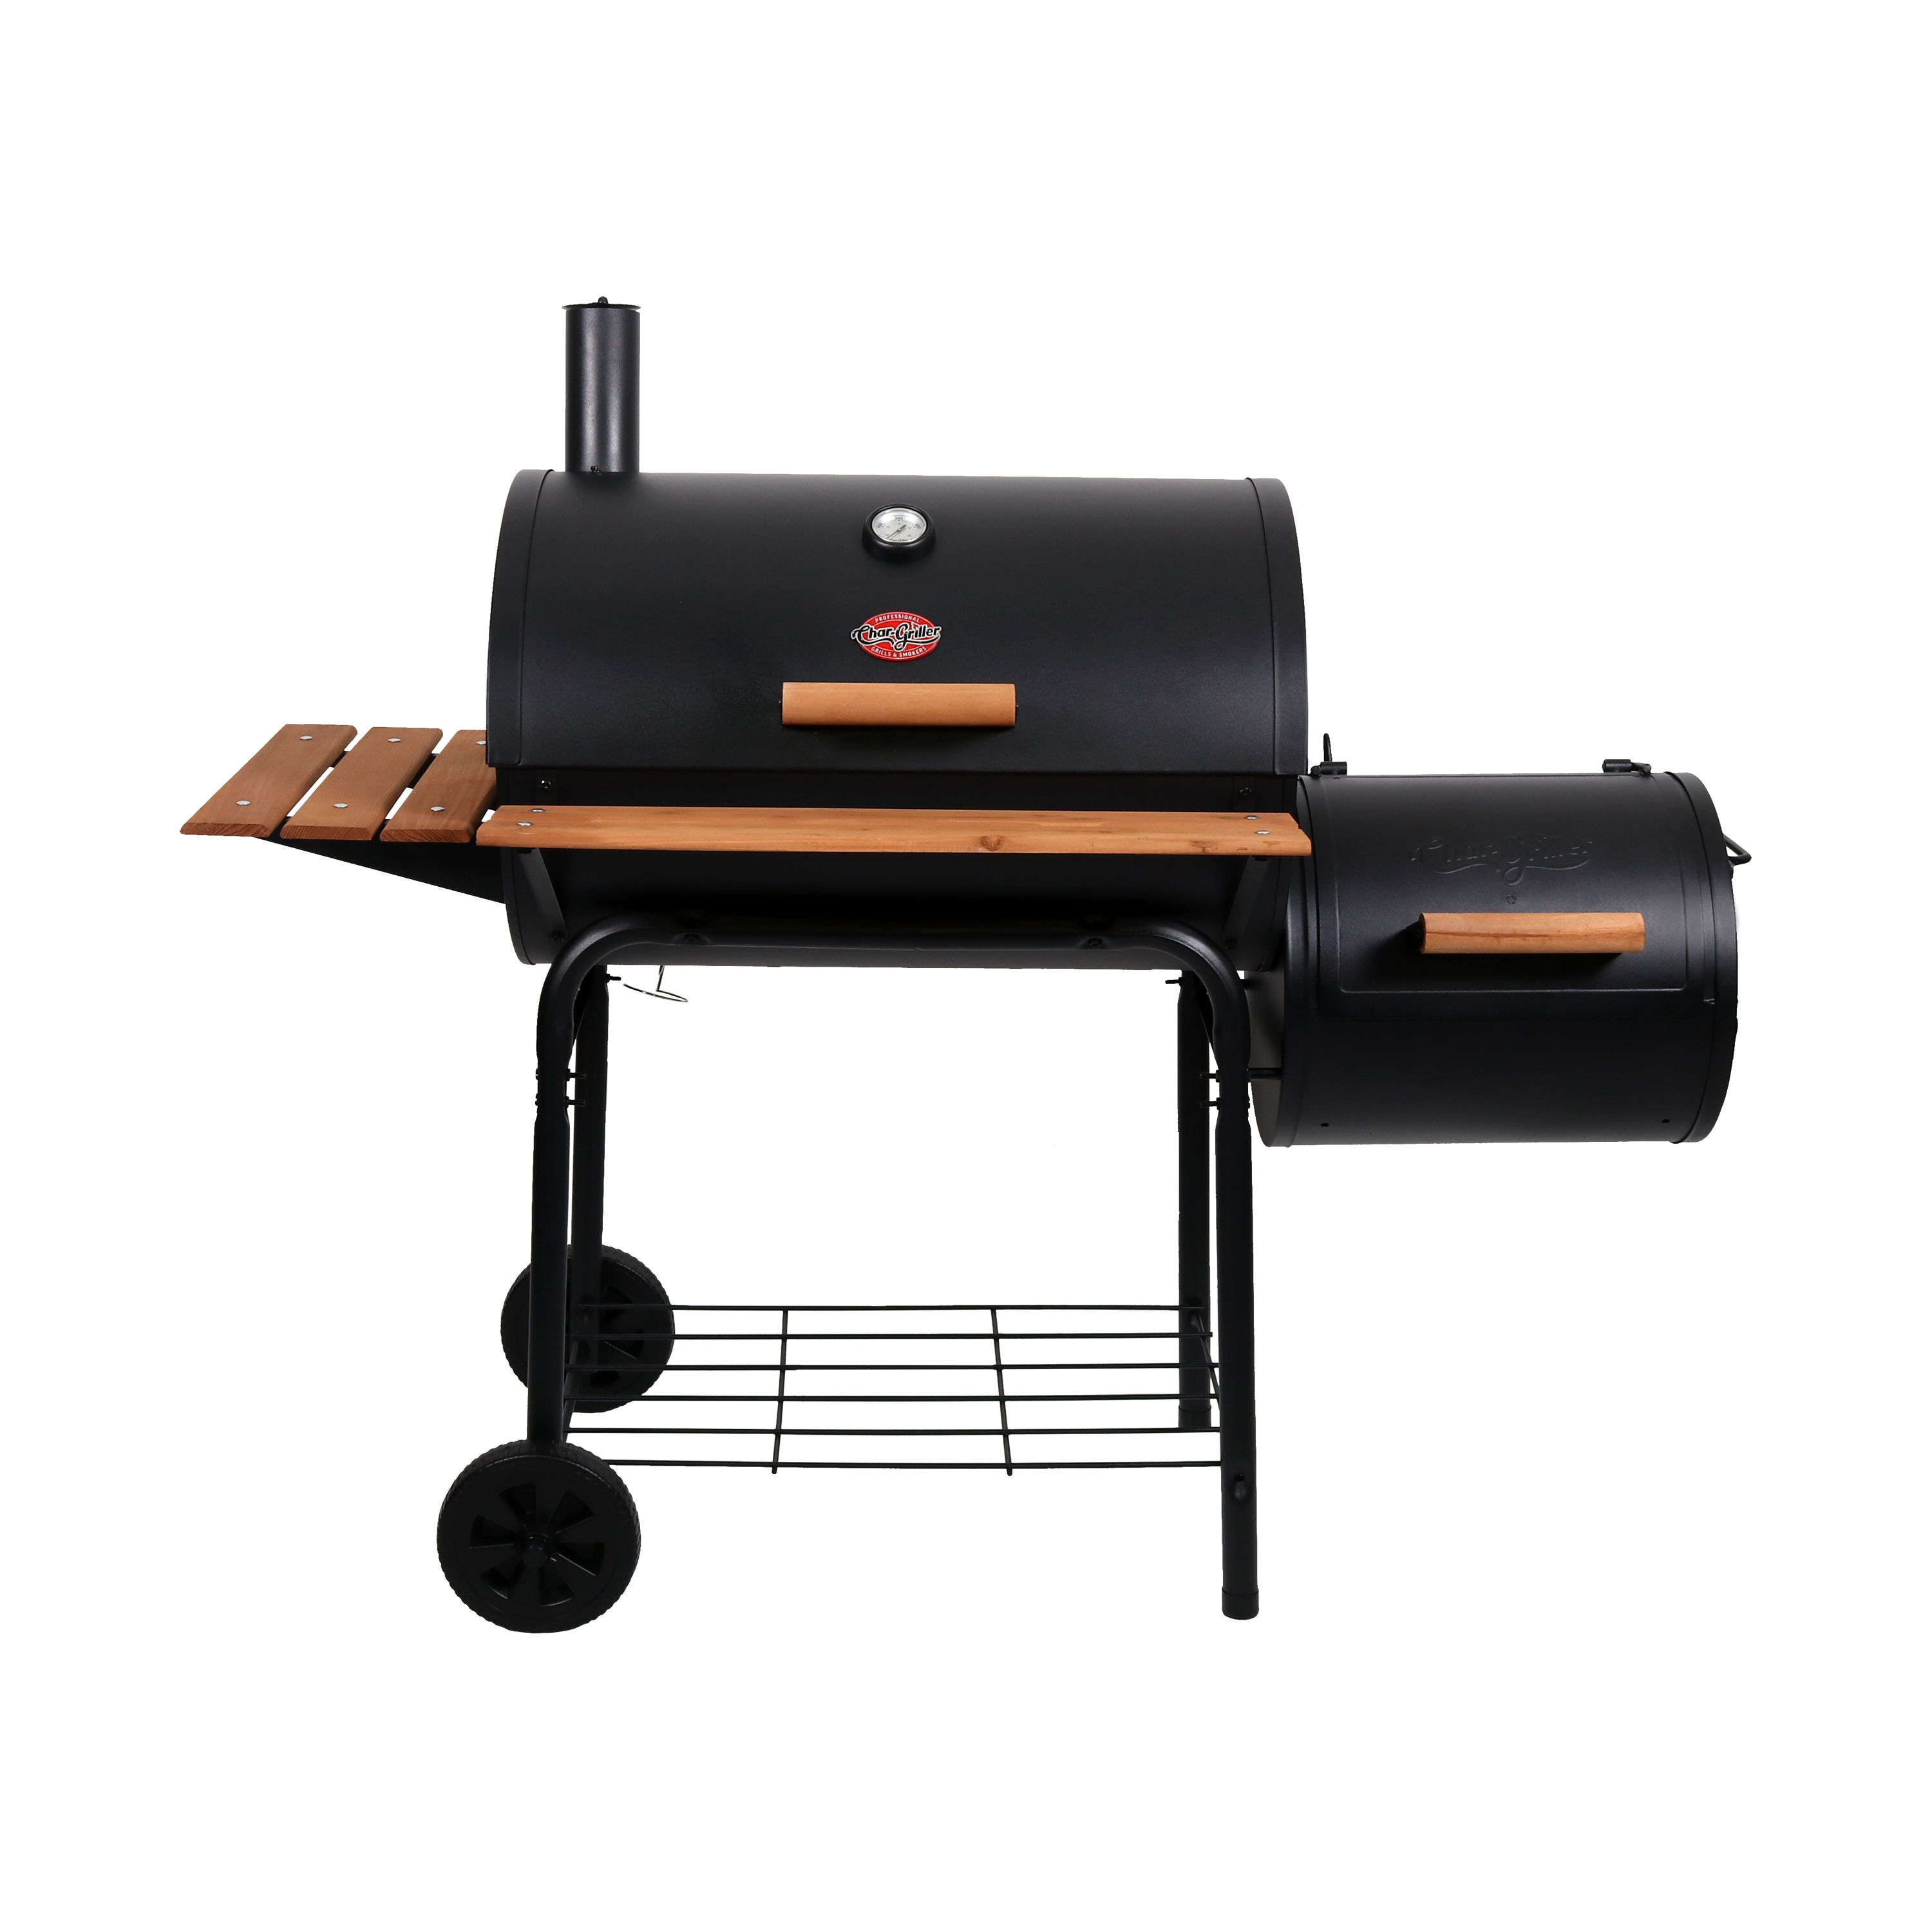 Char-Griller Smokin Pro 28" Charcoal Grill with Heat Diffuser - image 1 of 13